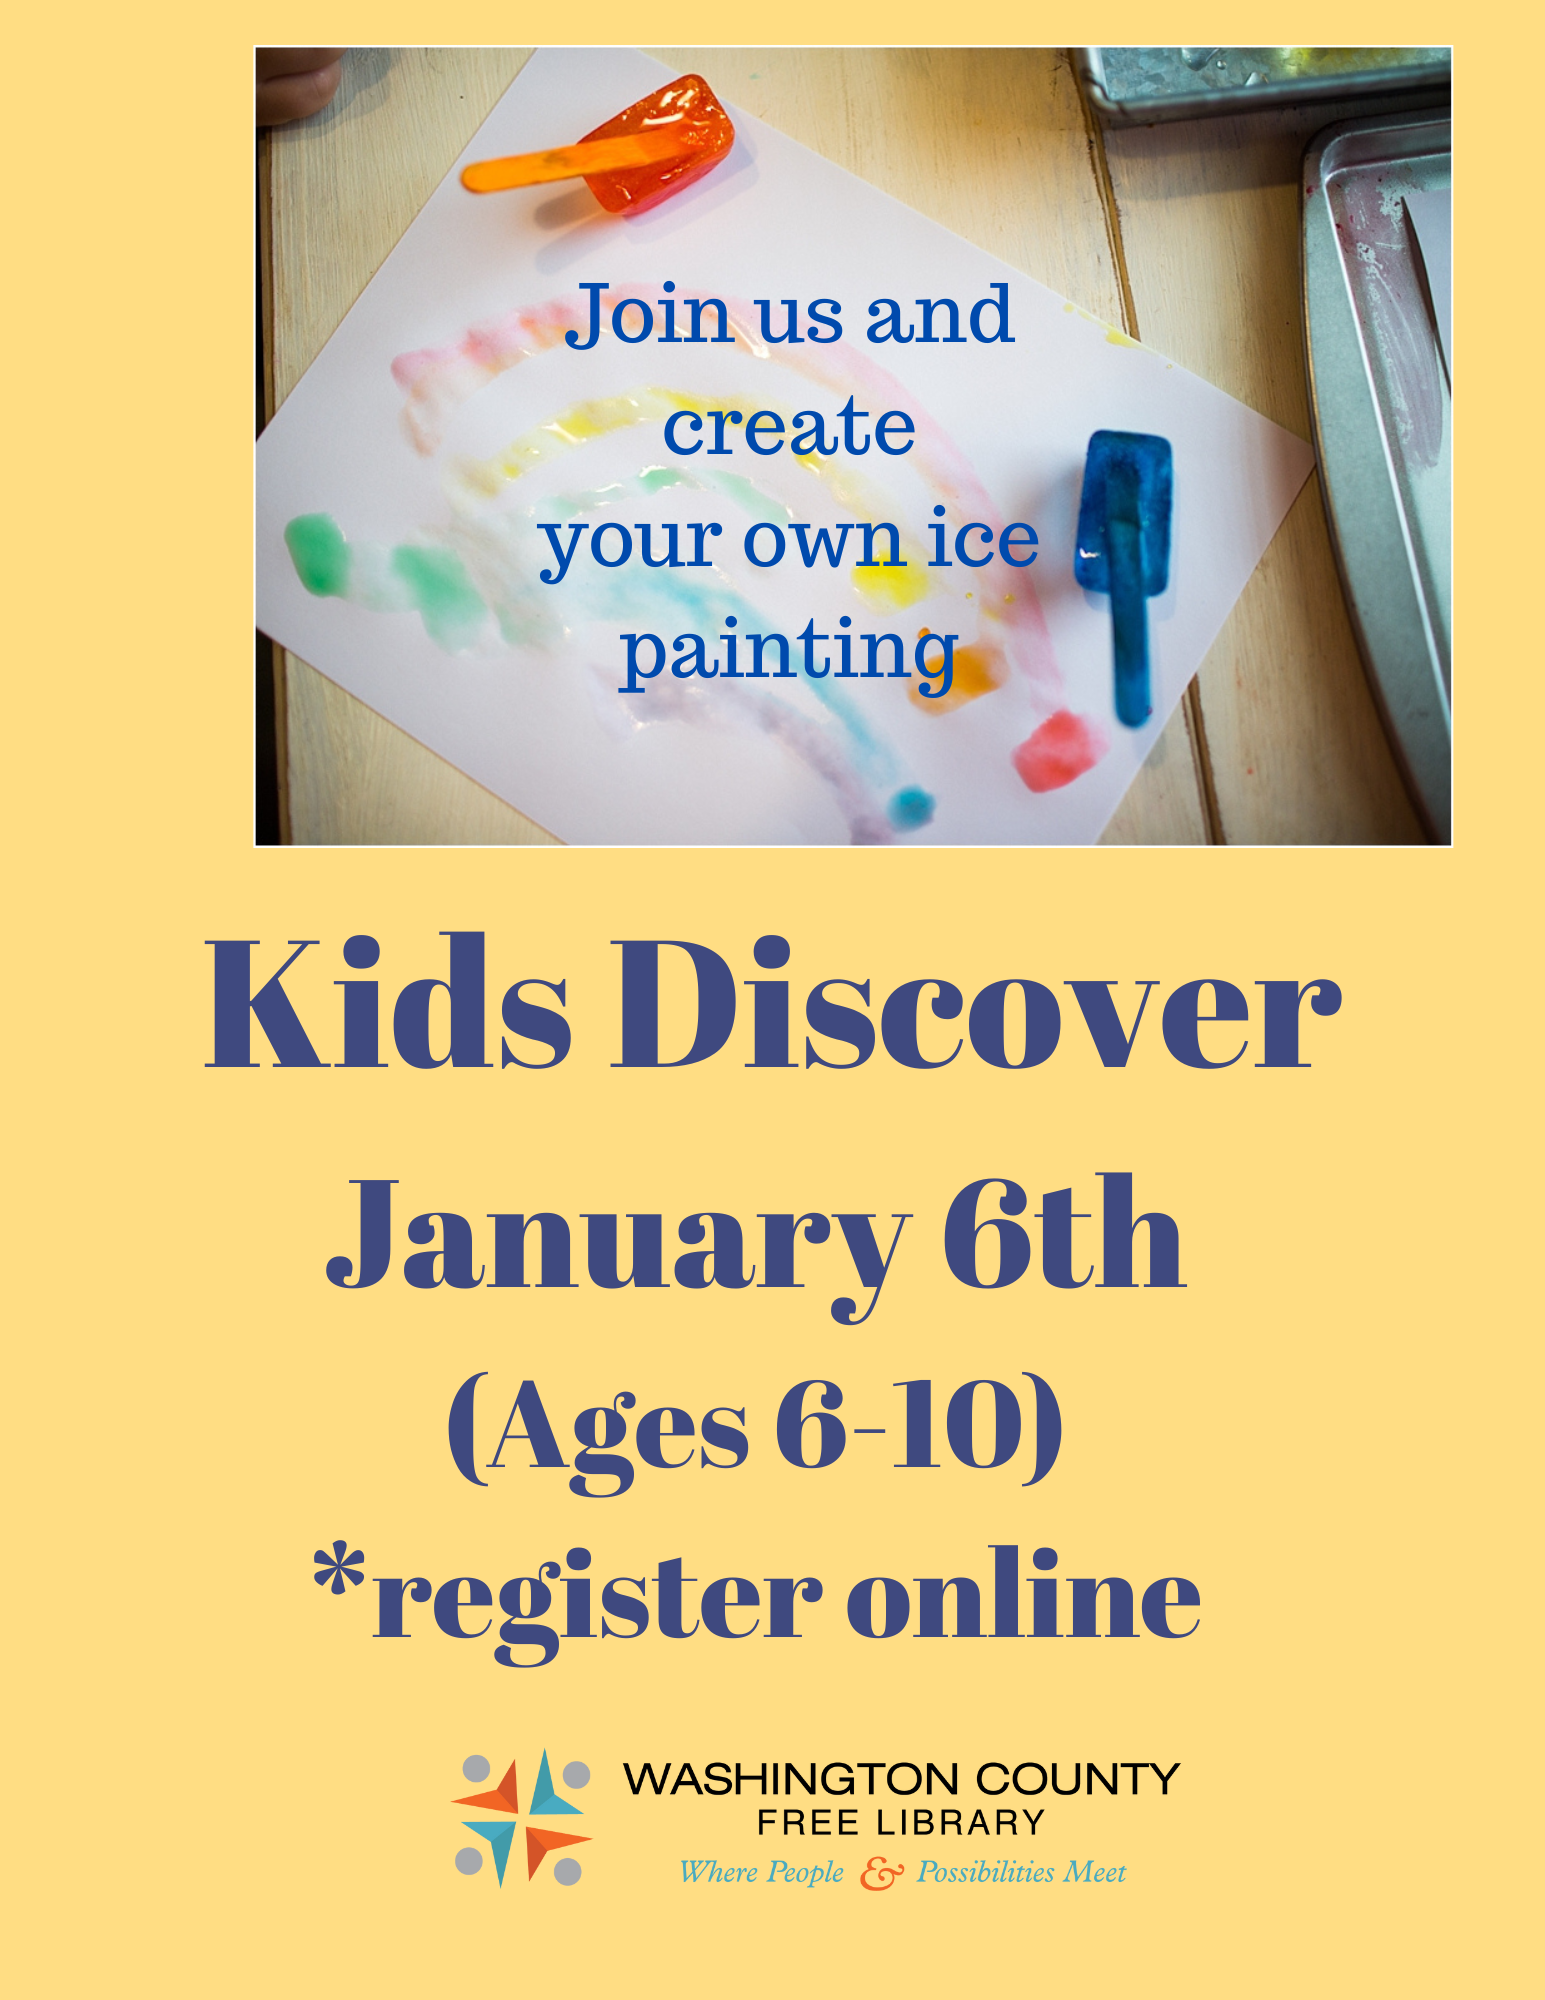 Kids Discover: Ice Painting